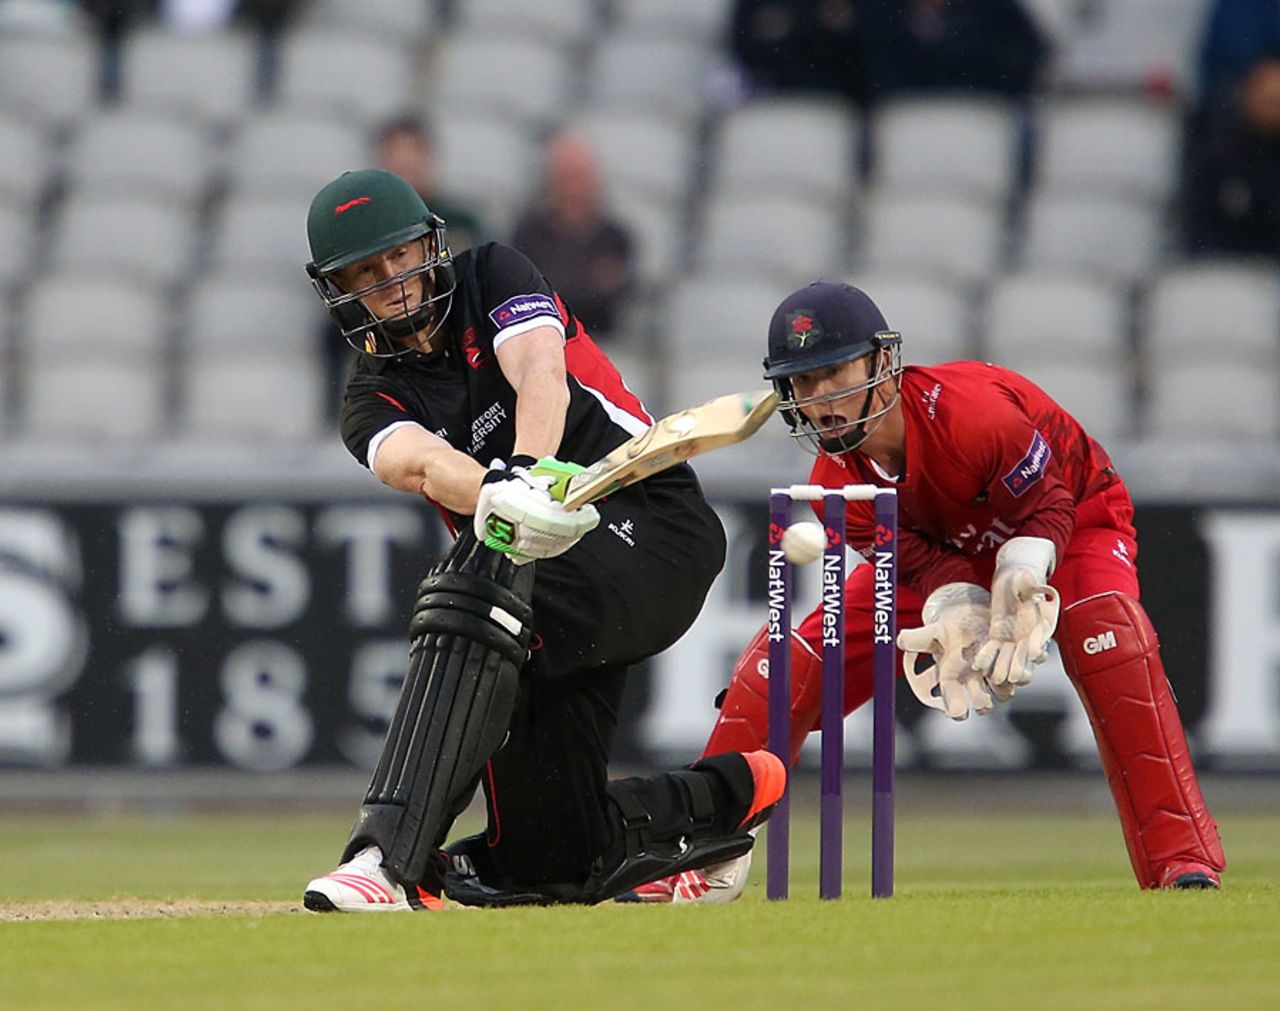 Kevin O'Brien sweeps during his 47, Lancashire v Leicestershire, NatWest Blast, North Group, Old Trafford, May 15, 2015